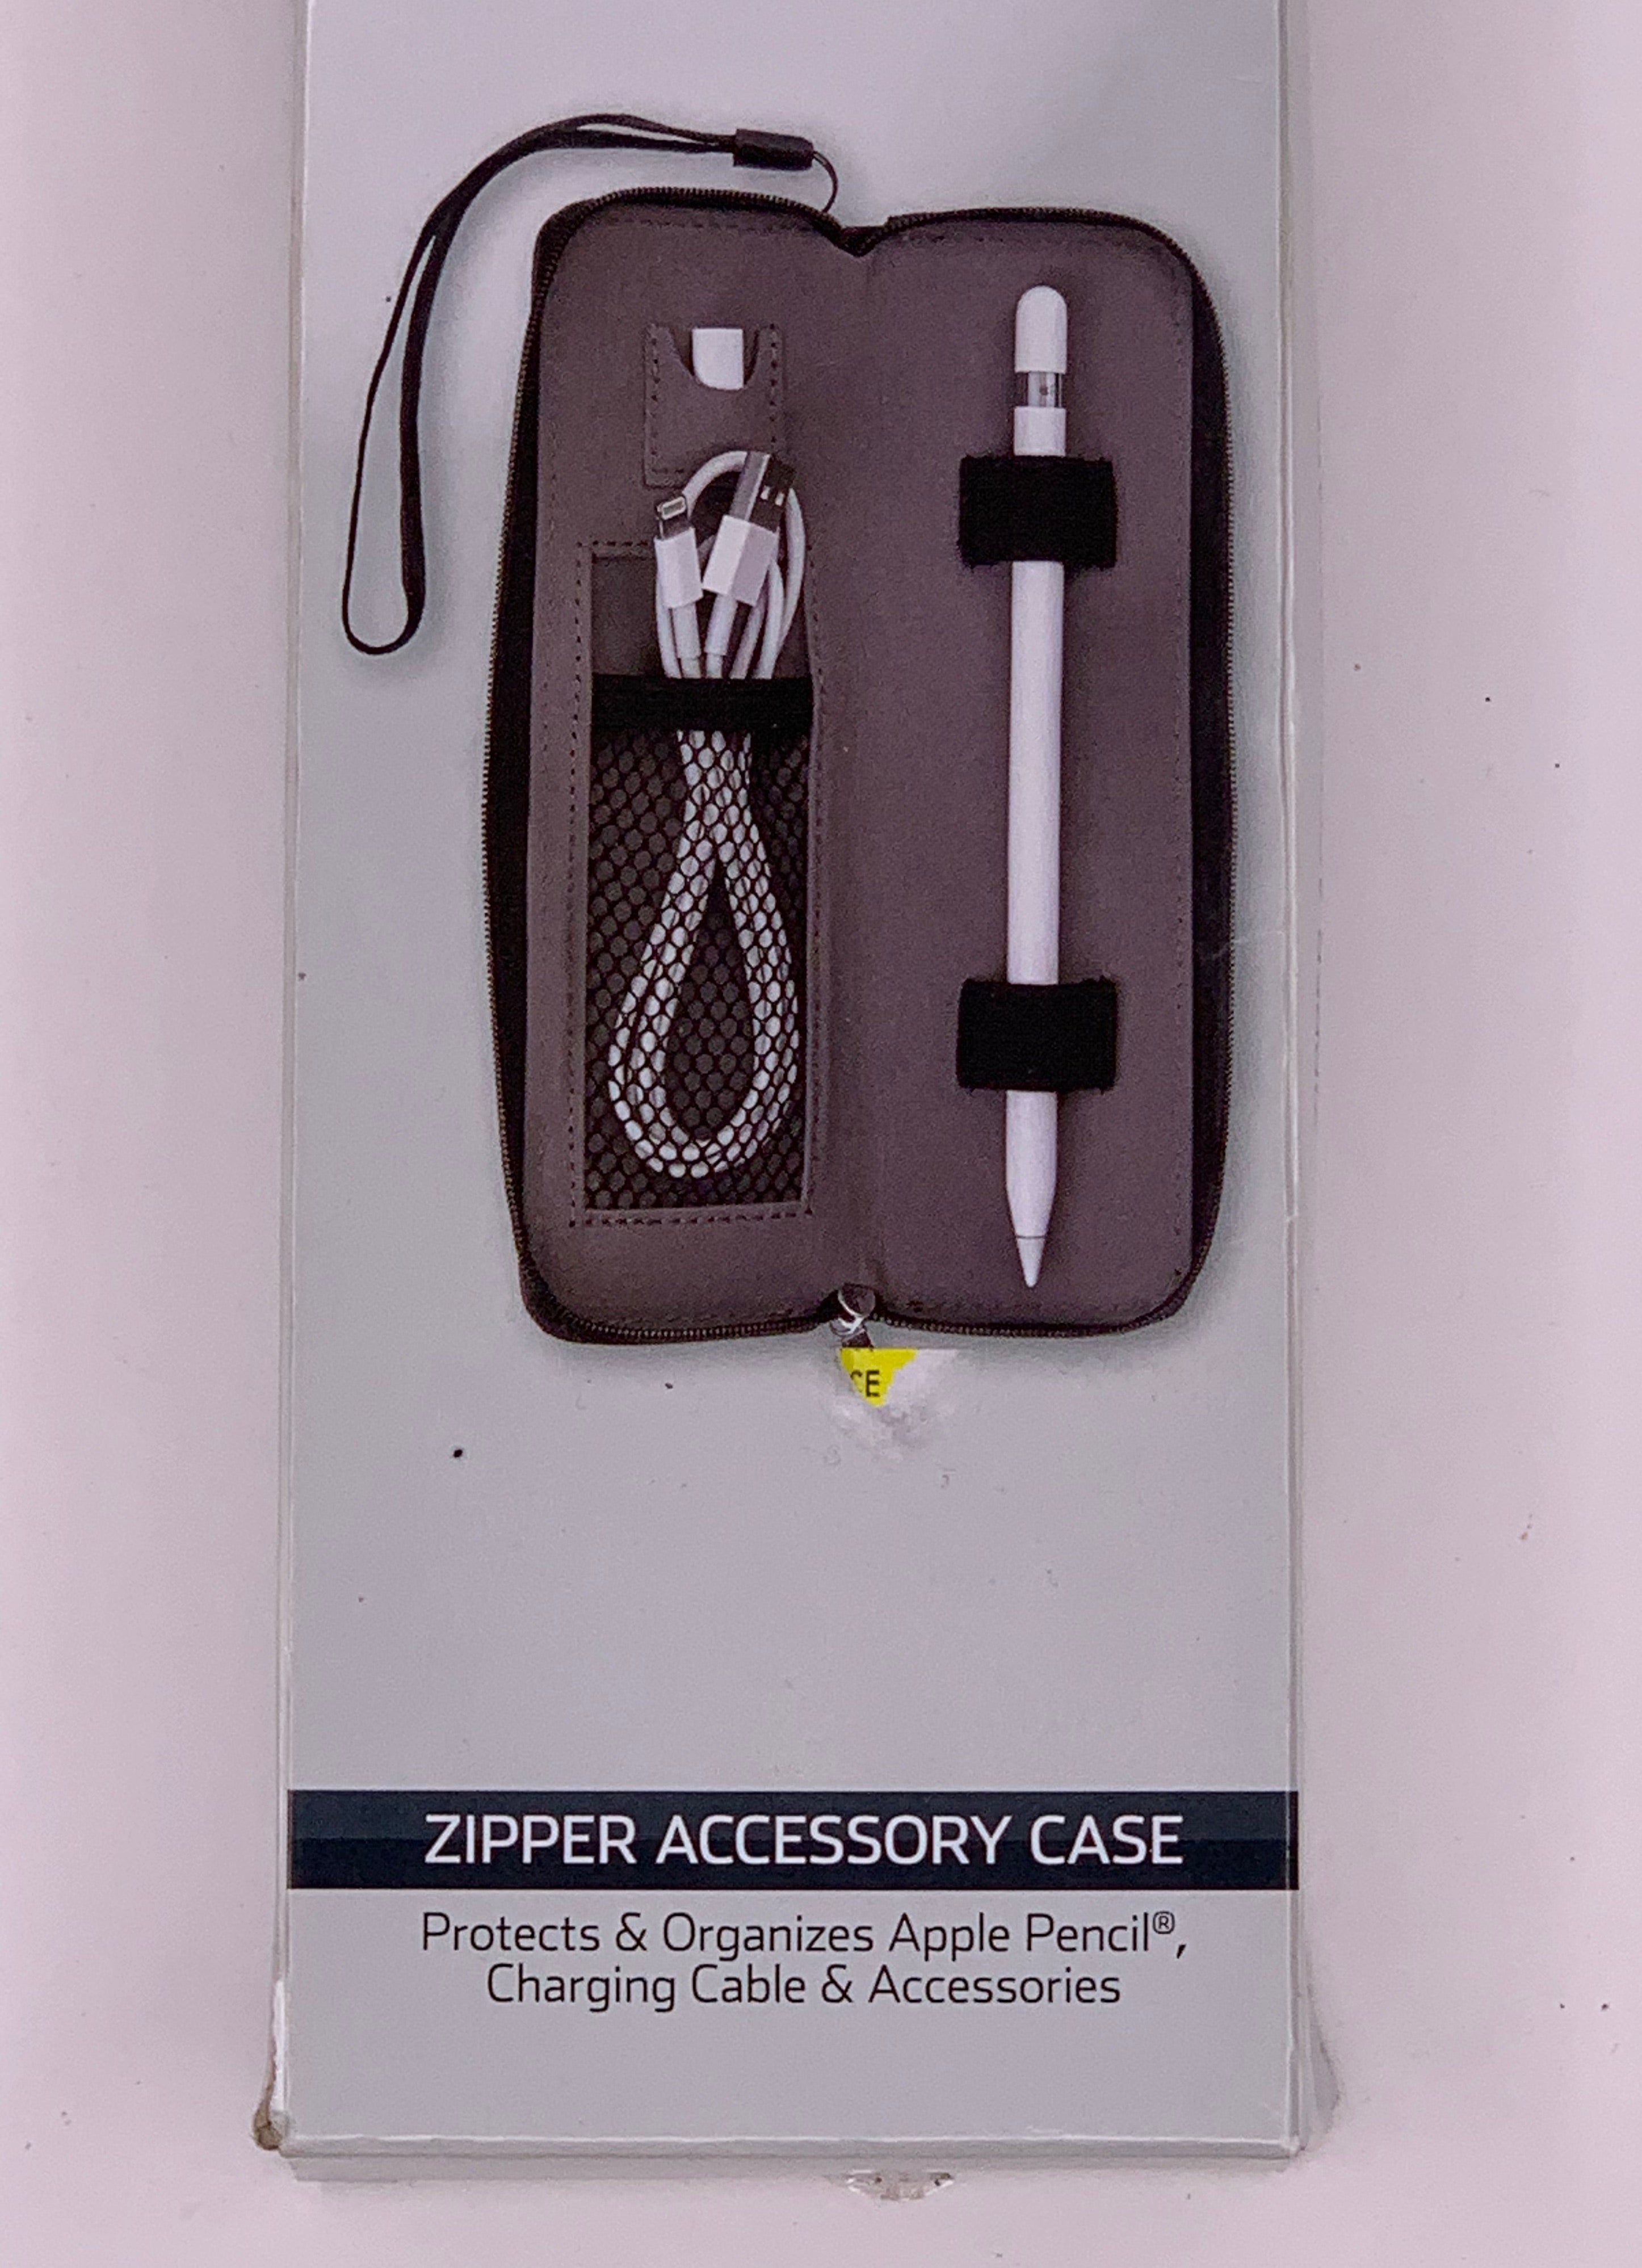 Onn Zipper Accessory Case Protects Organizes Apple Pencil Charging Cable Accessories Microfiber Interior Black